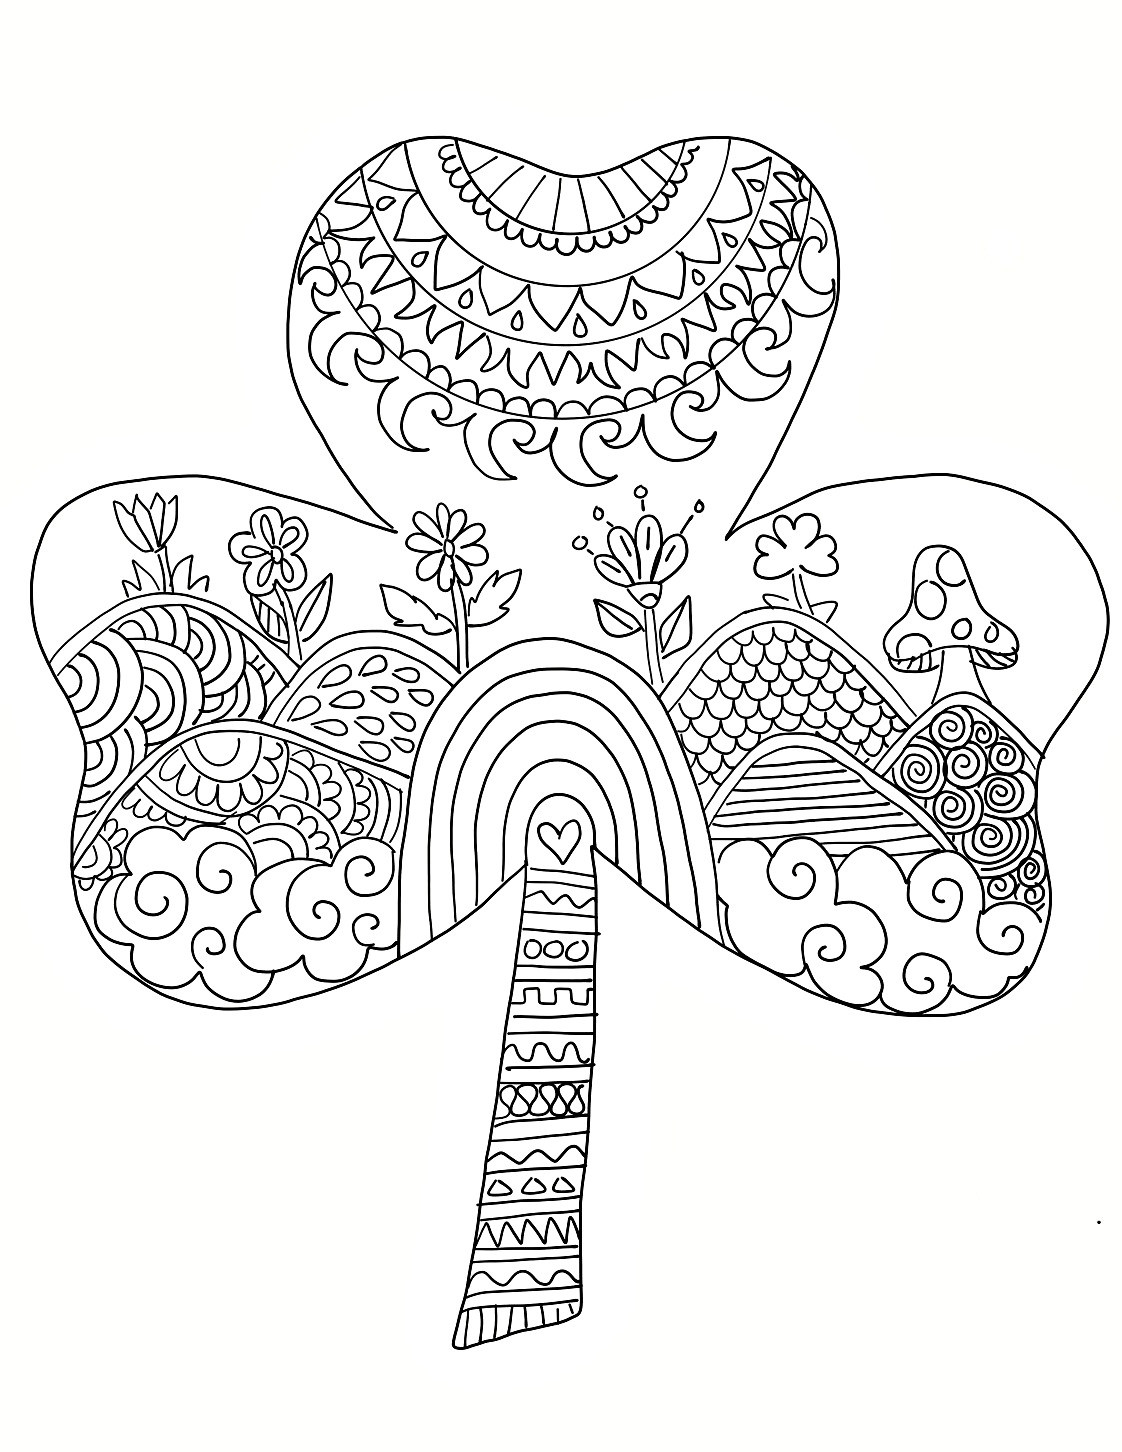 Free Printable Coloring Sheets On St. Patrick'S Day
 Cool Shamrock Mandala Coloring Page Coloring Pages – Free